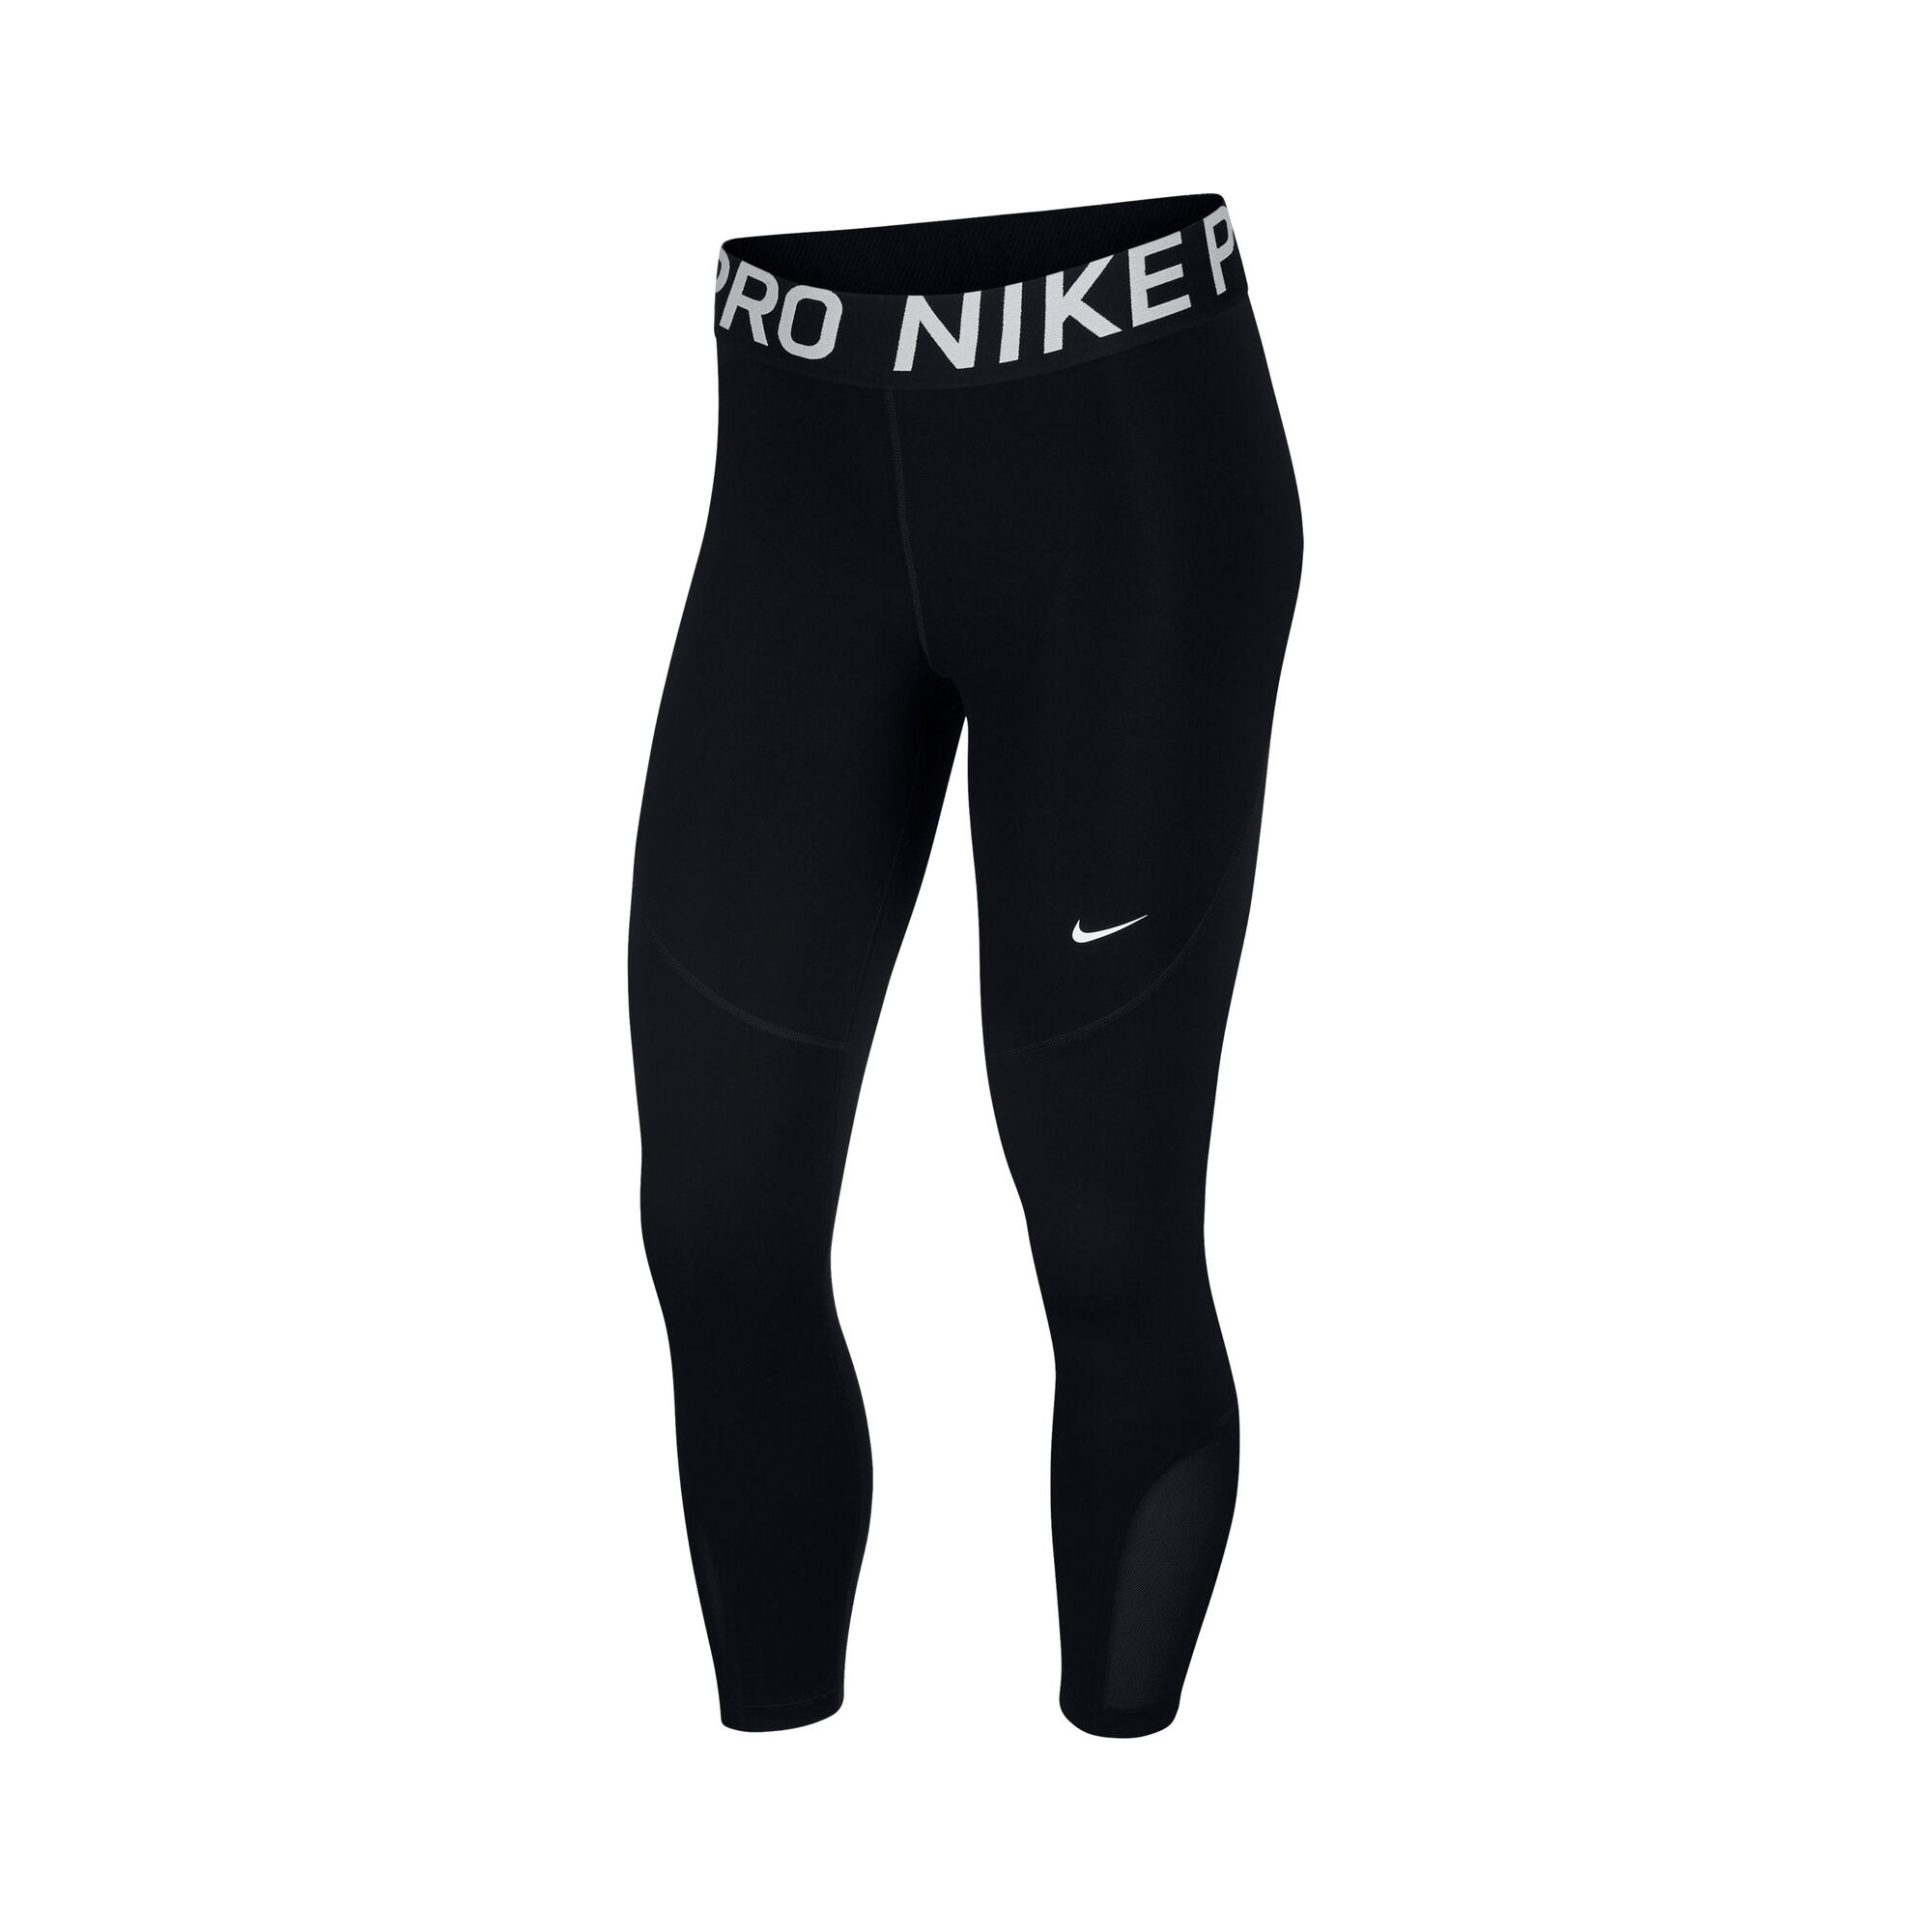 Nike Pro Women's Basketball Tights In Black Lyst, 40% OFF